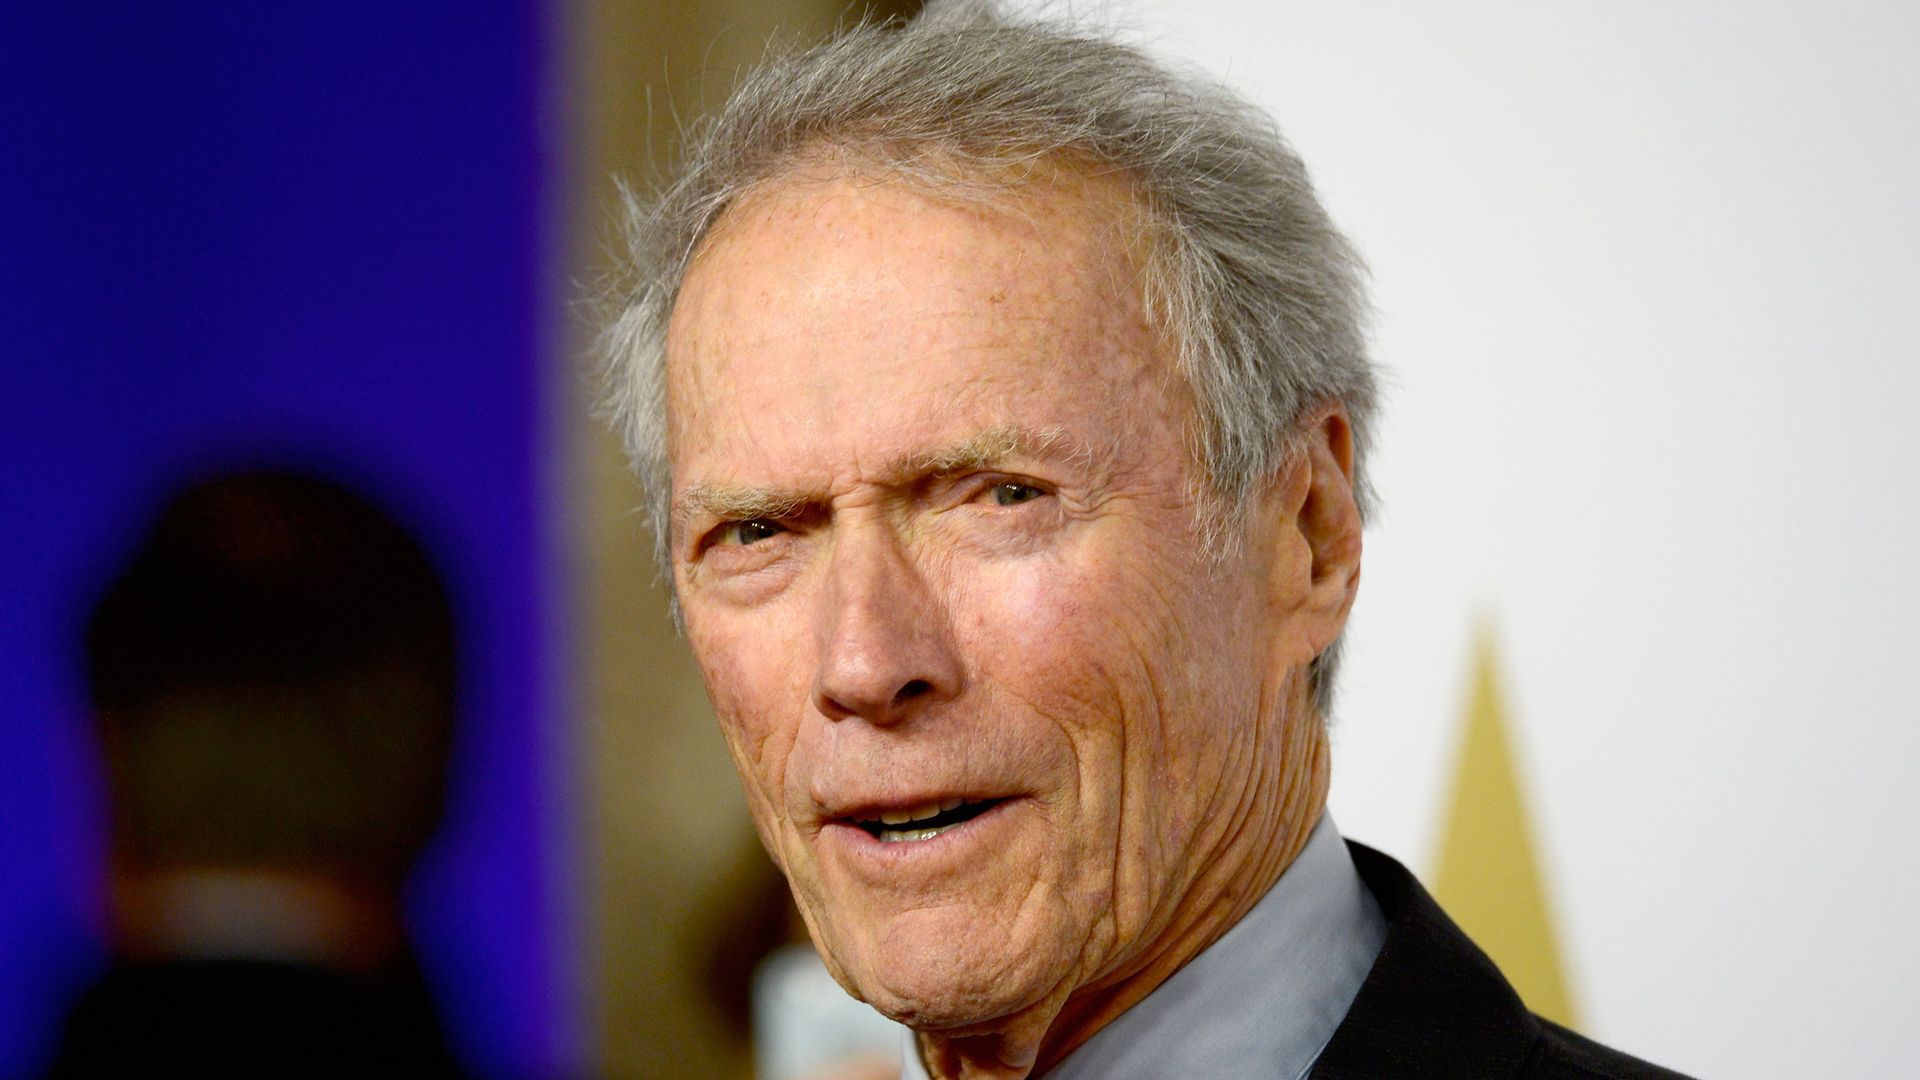 Clint Eastwood, 93, looks almost unrecognizable for rare public appearance in hometown